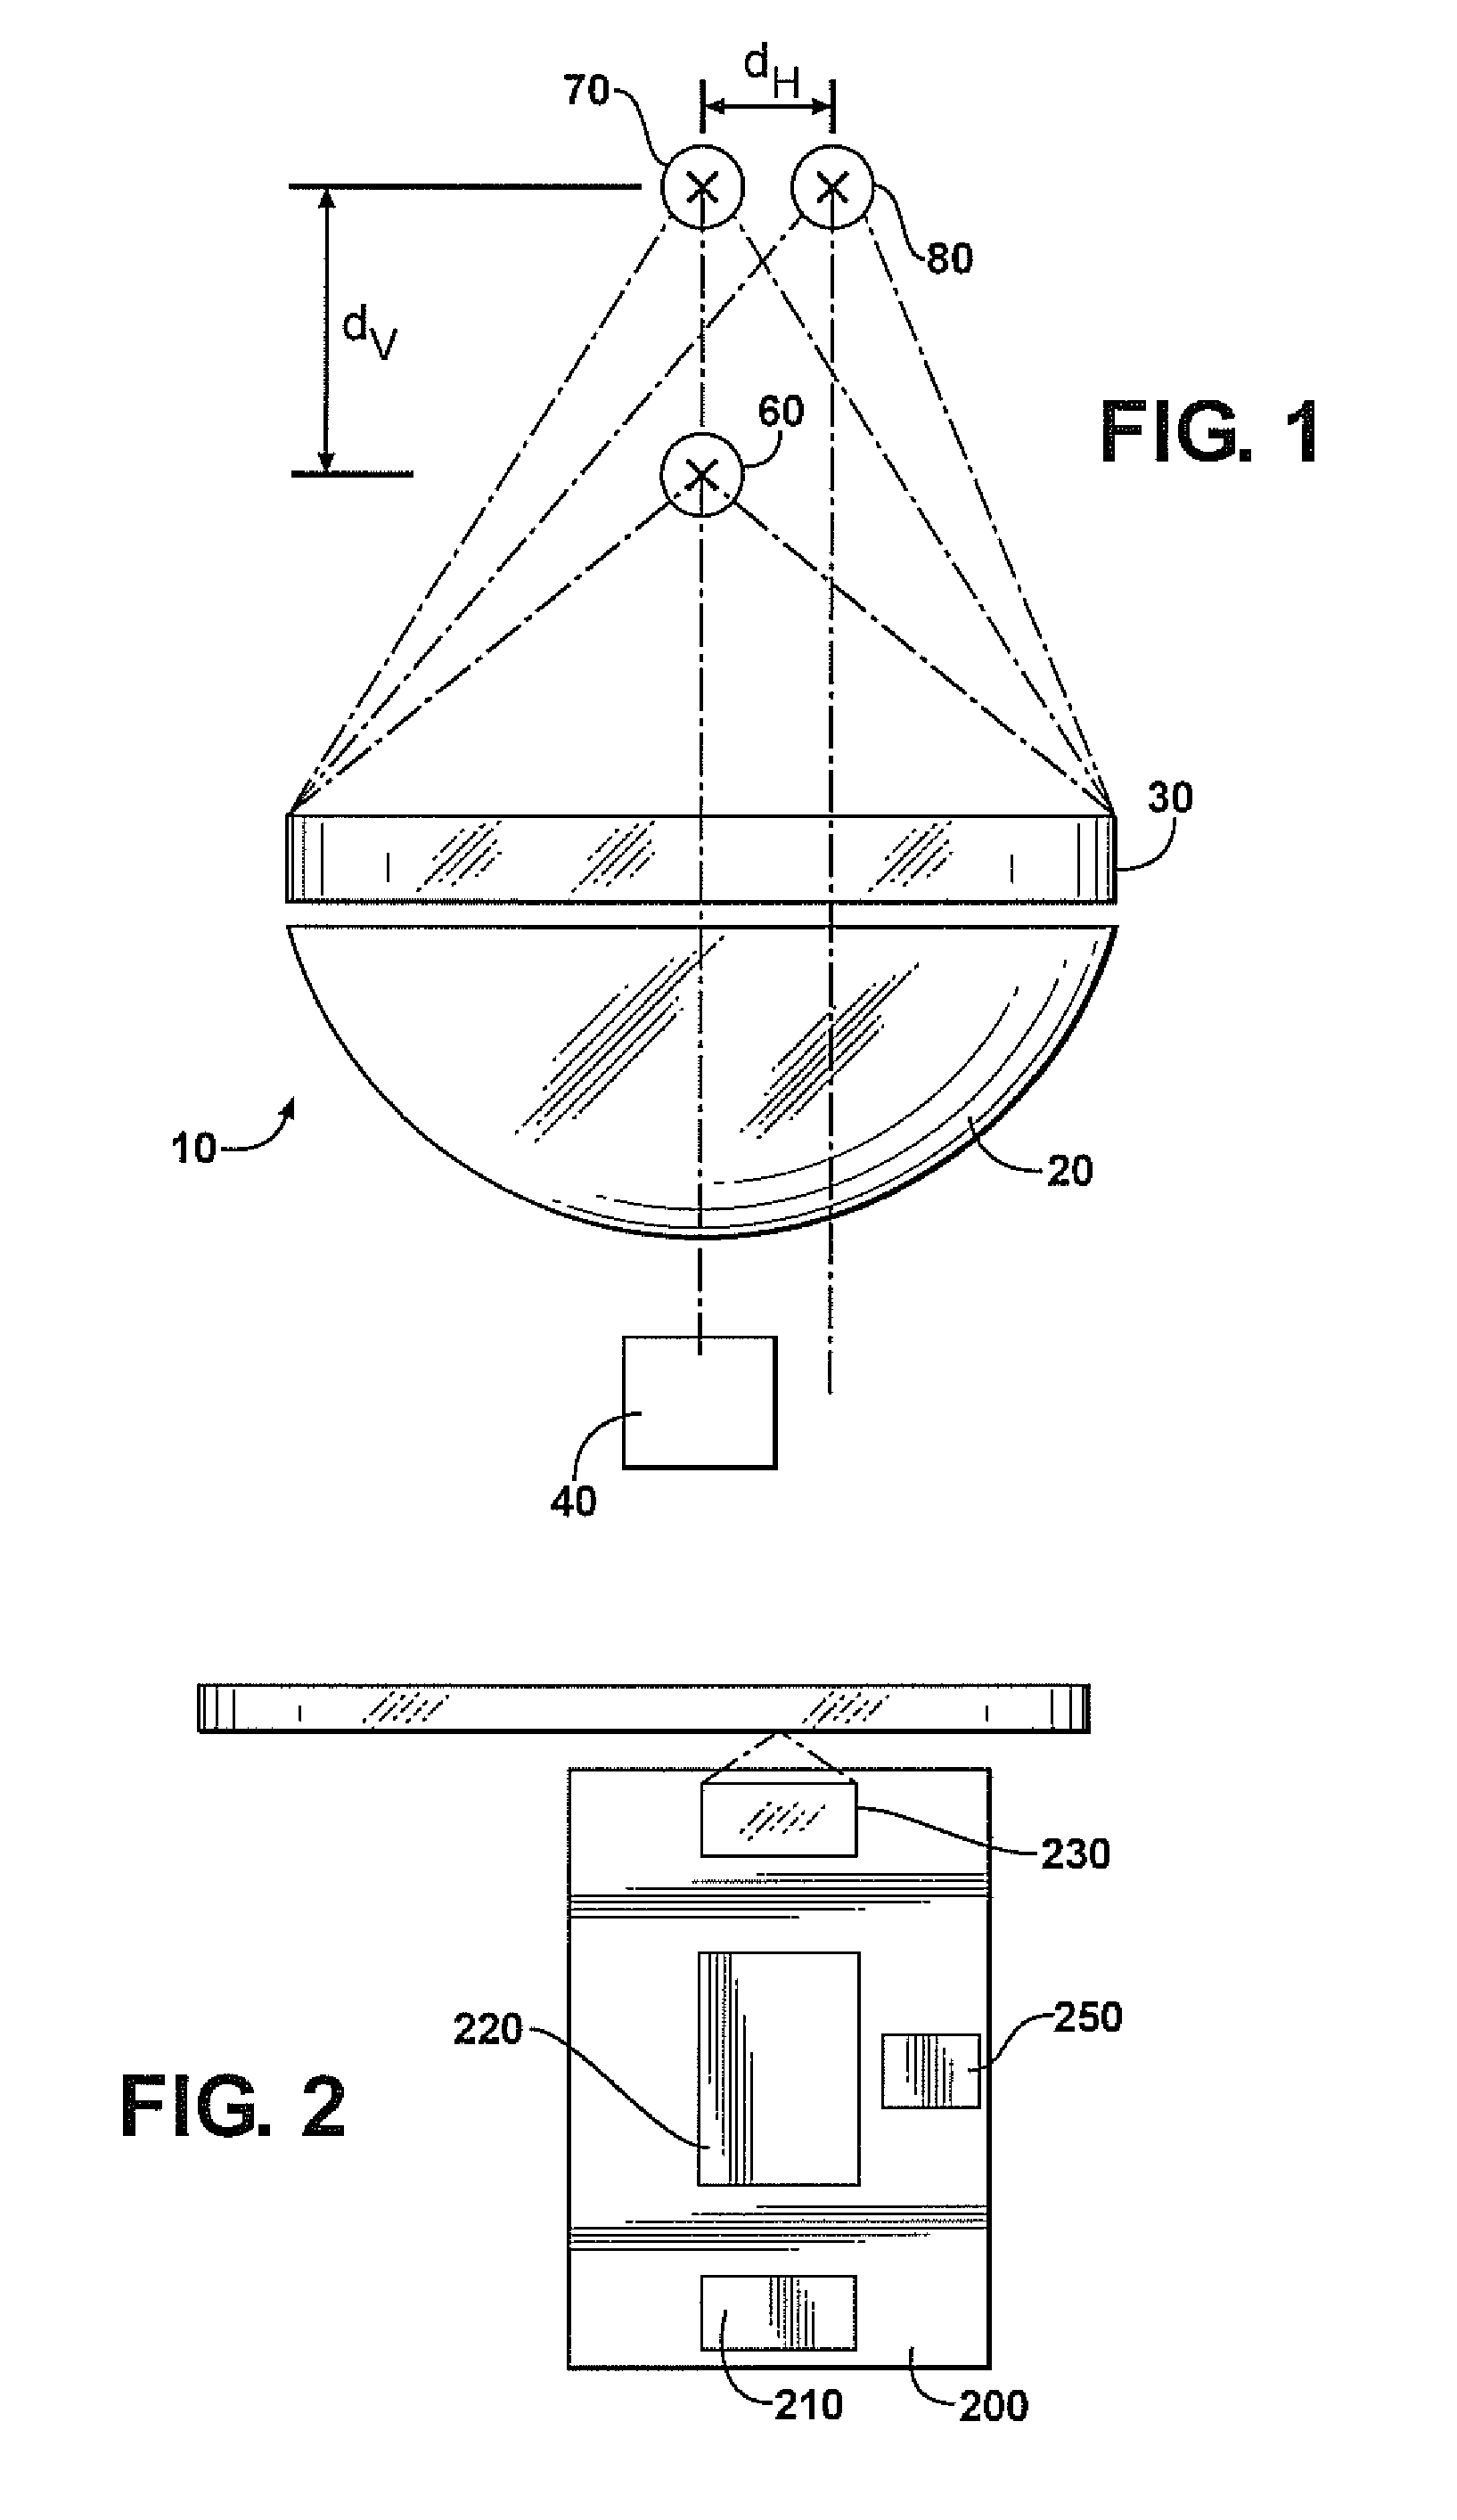 Pick-up head assembly for optical disc employing electrically tunable liquid crystal lens